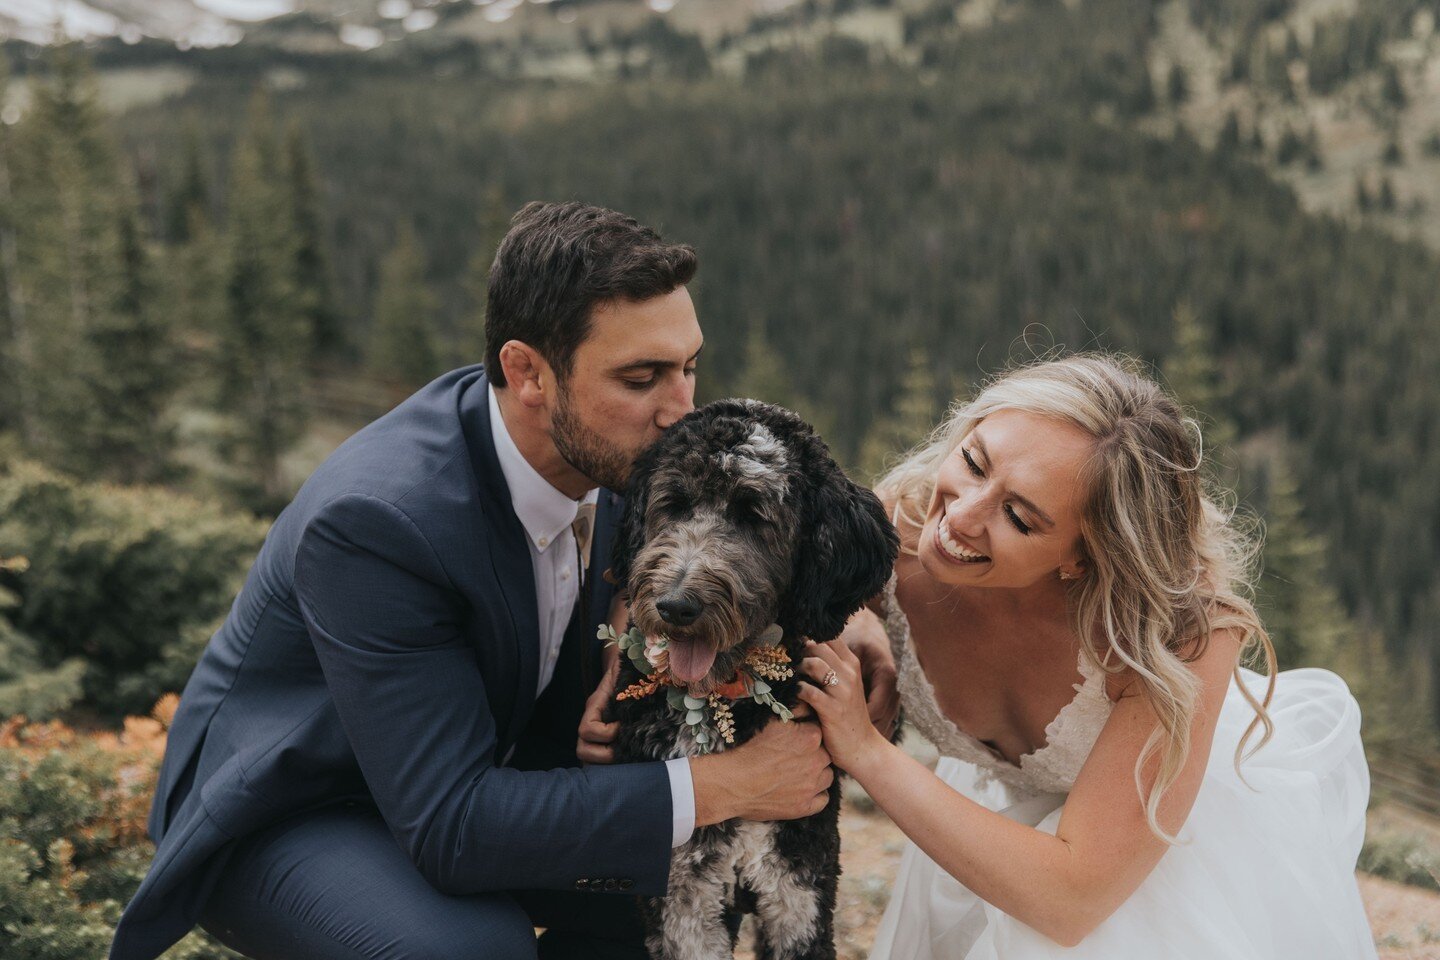 Gimme all the floofs on all the shoots, all the wedding days, please and thank you.